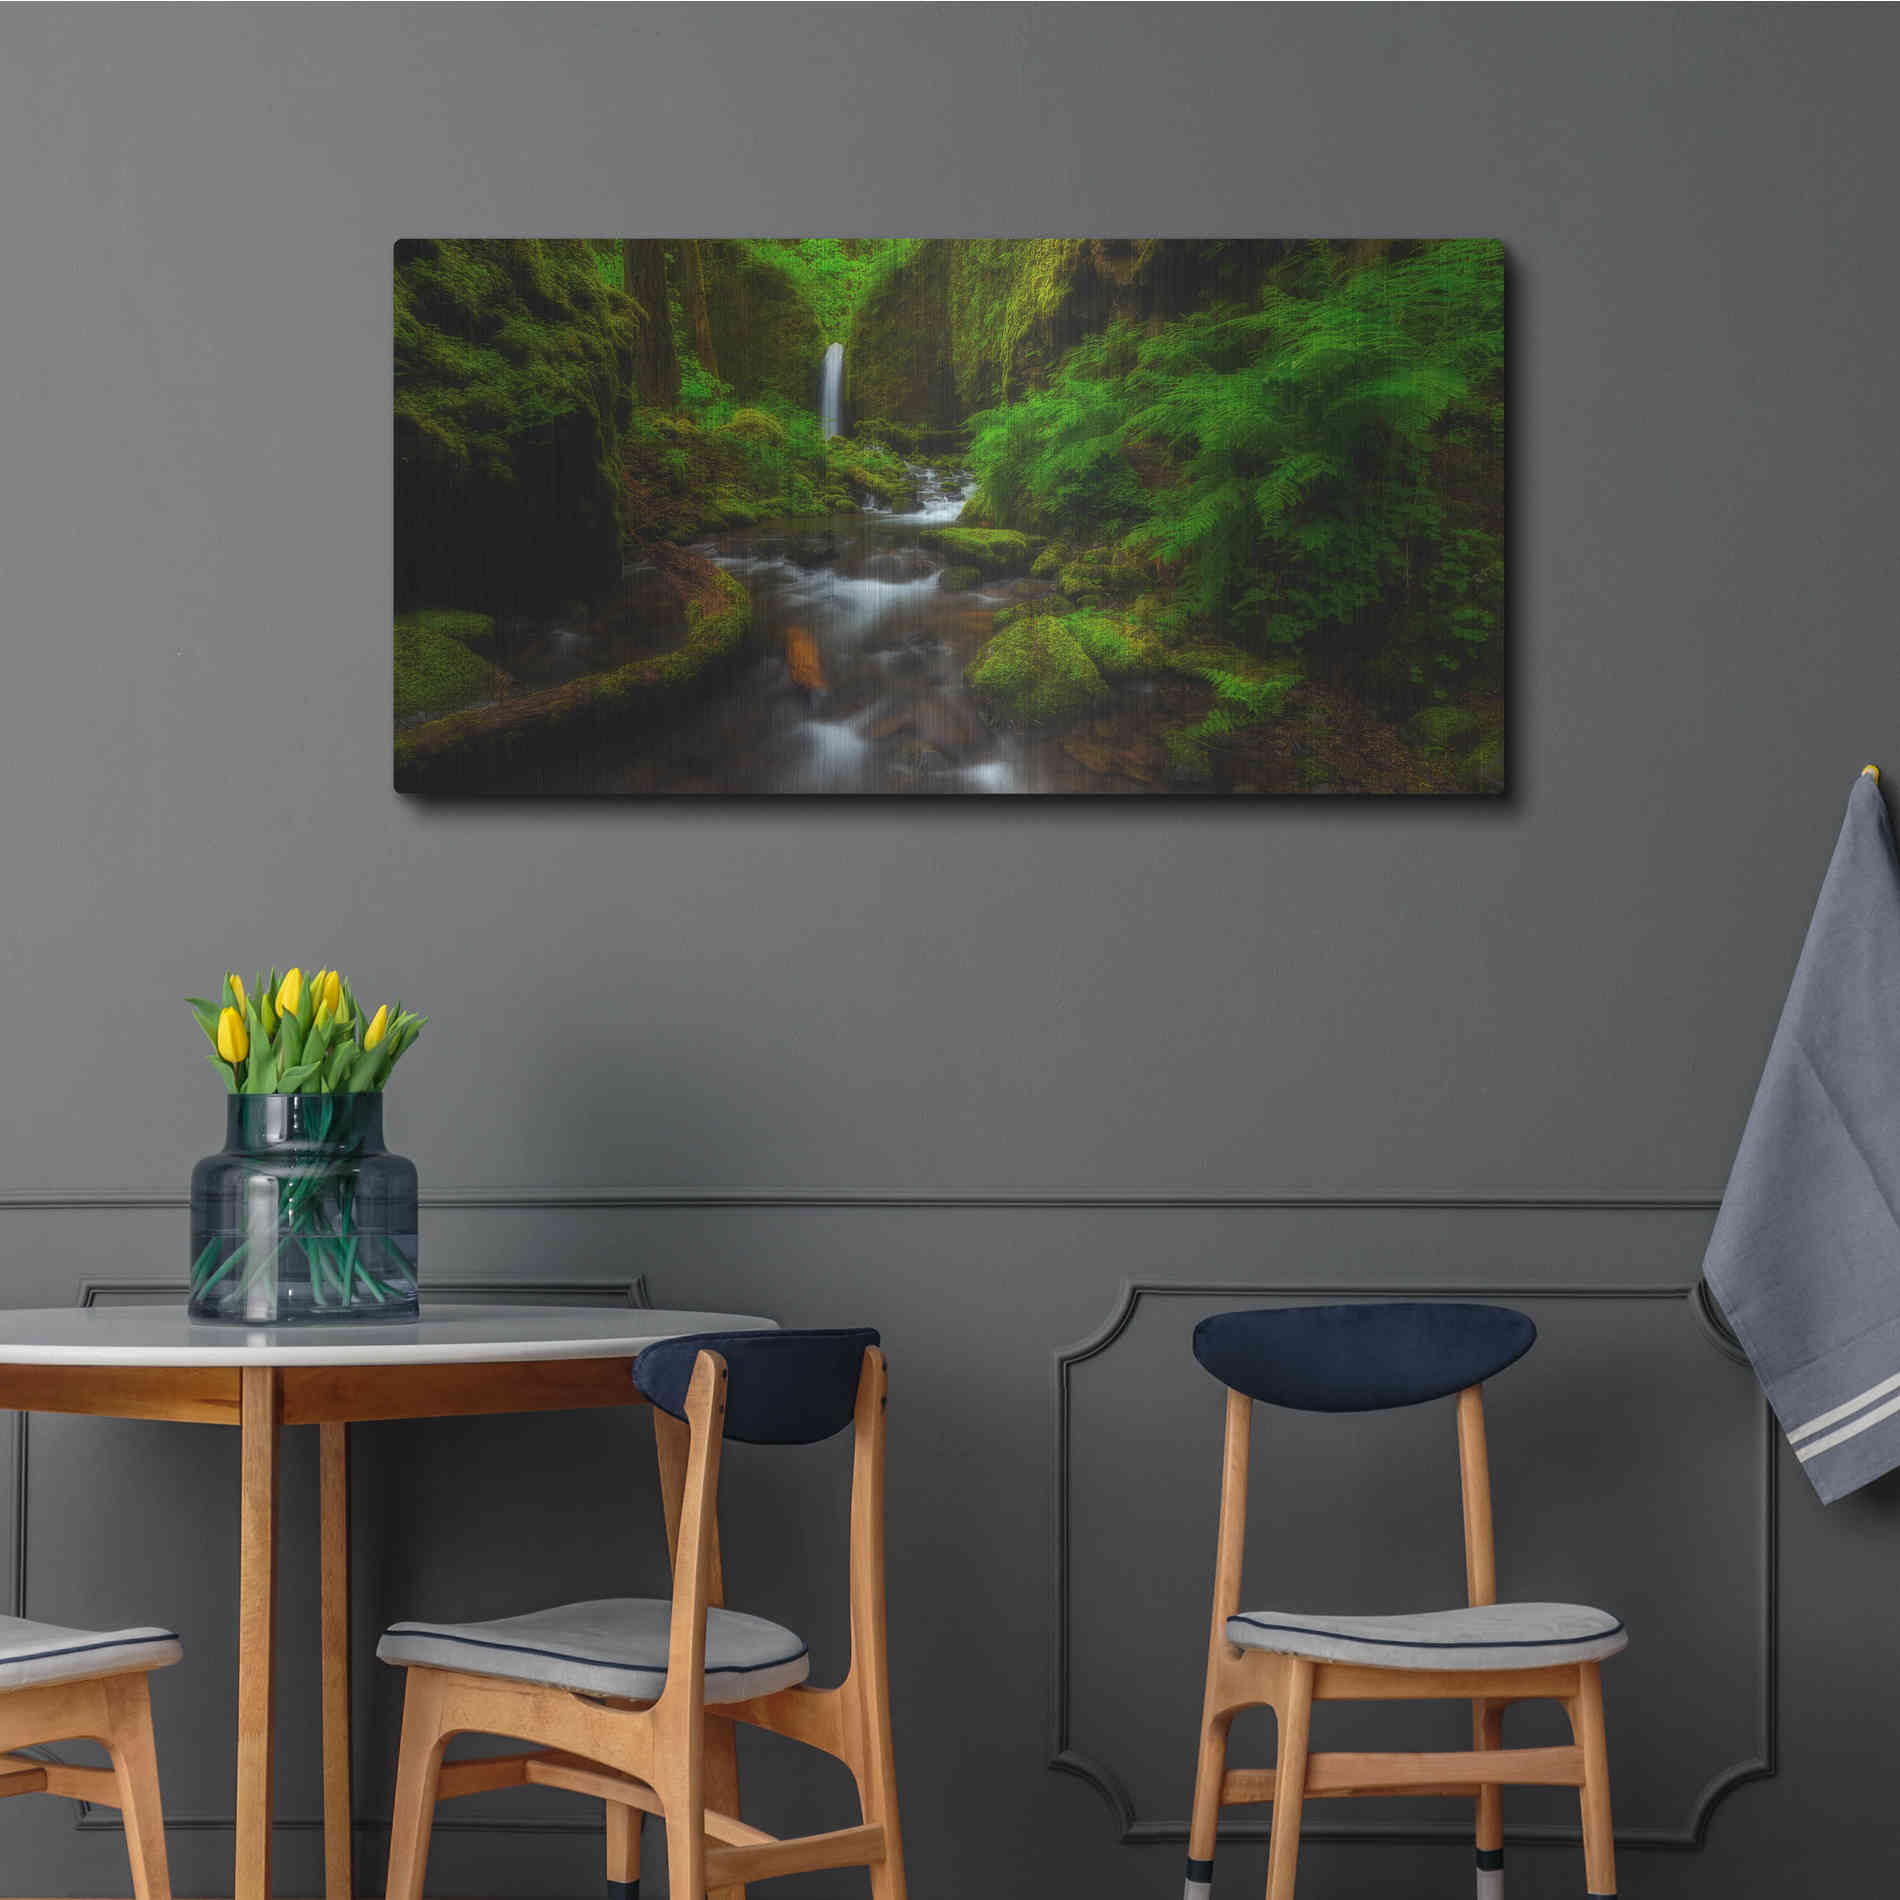 Luxe Metal Art 'Early Morning At The Grotto' by Darren White, Metal Wall Art,48x24